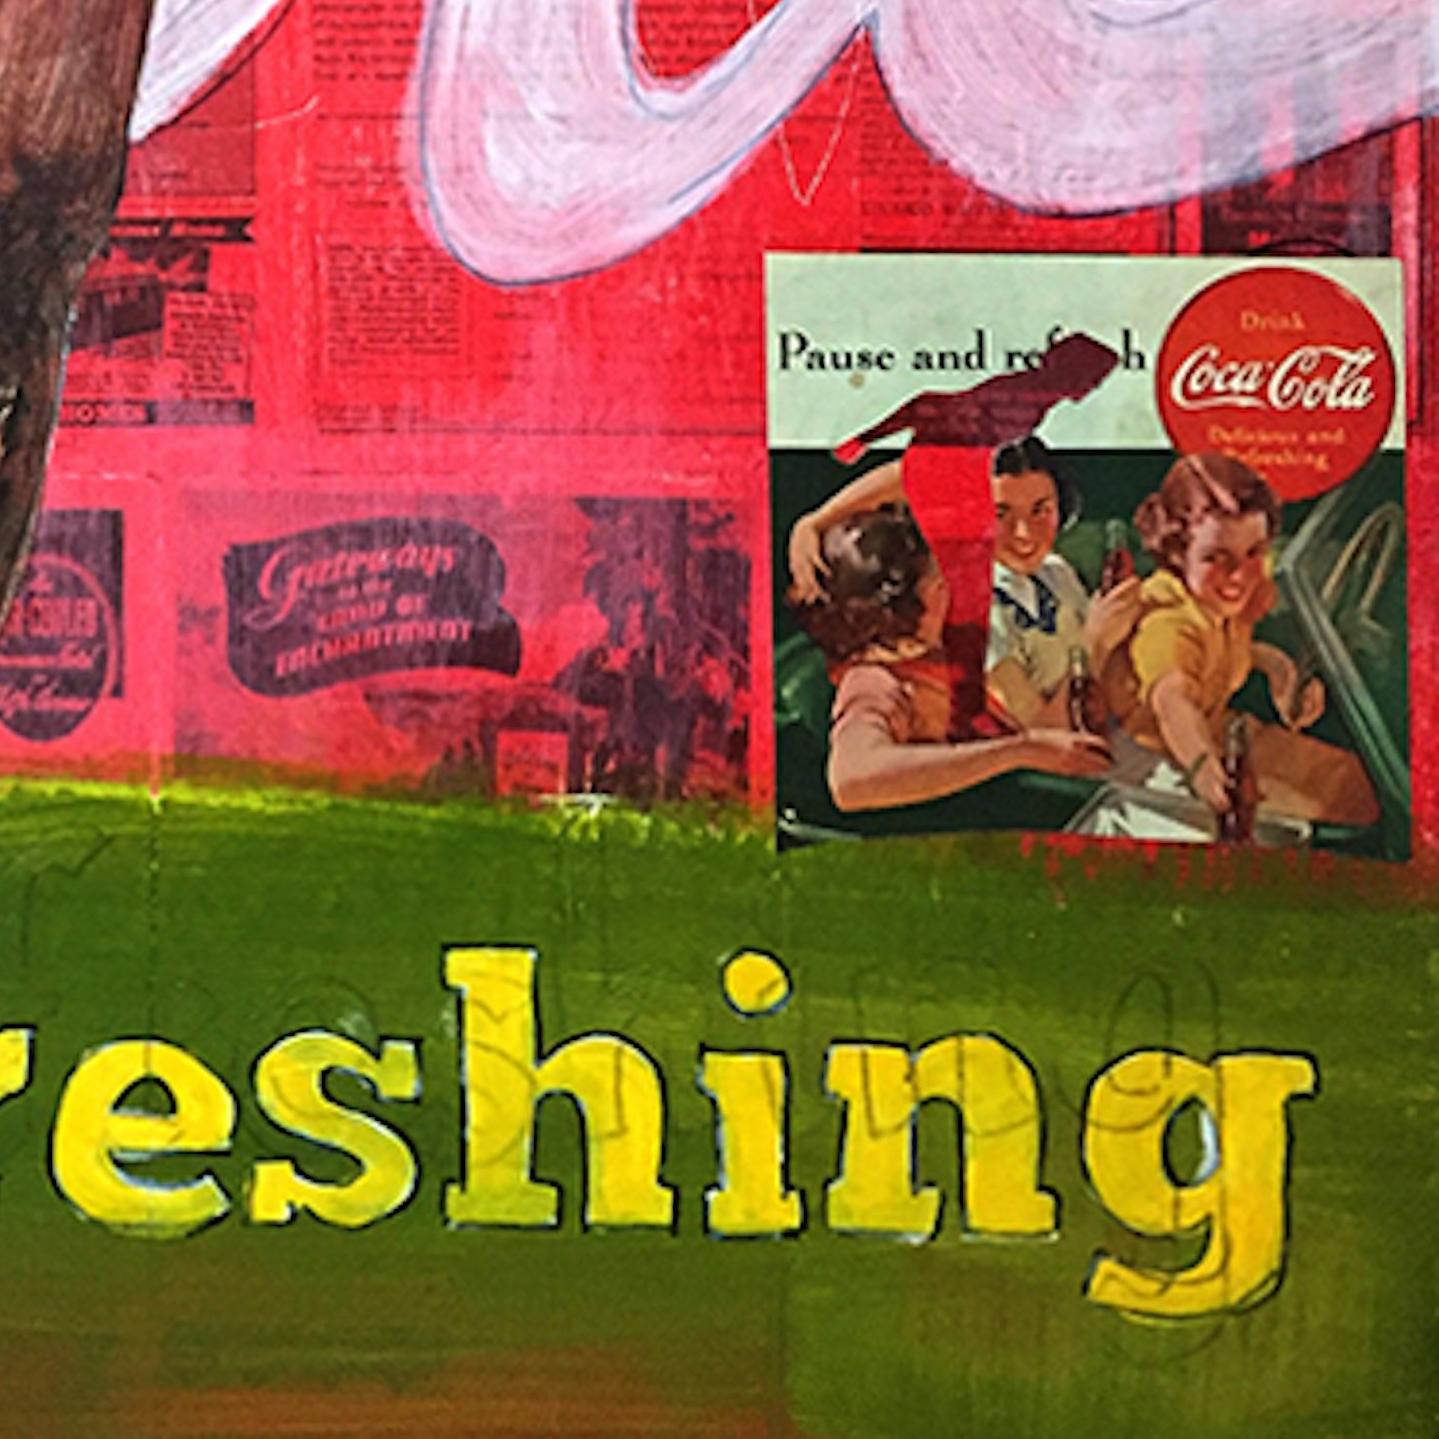 Nostalgic mixed media.  Homage to the vintage Coca Cola.  Vibrant colors.  Narrative background.  

About the artist:

David's paintings have a build-up of layers using different mixed mediums such as: resins, molding, paste, wood, sand, paper and